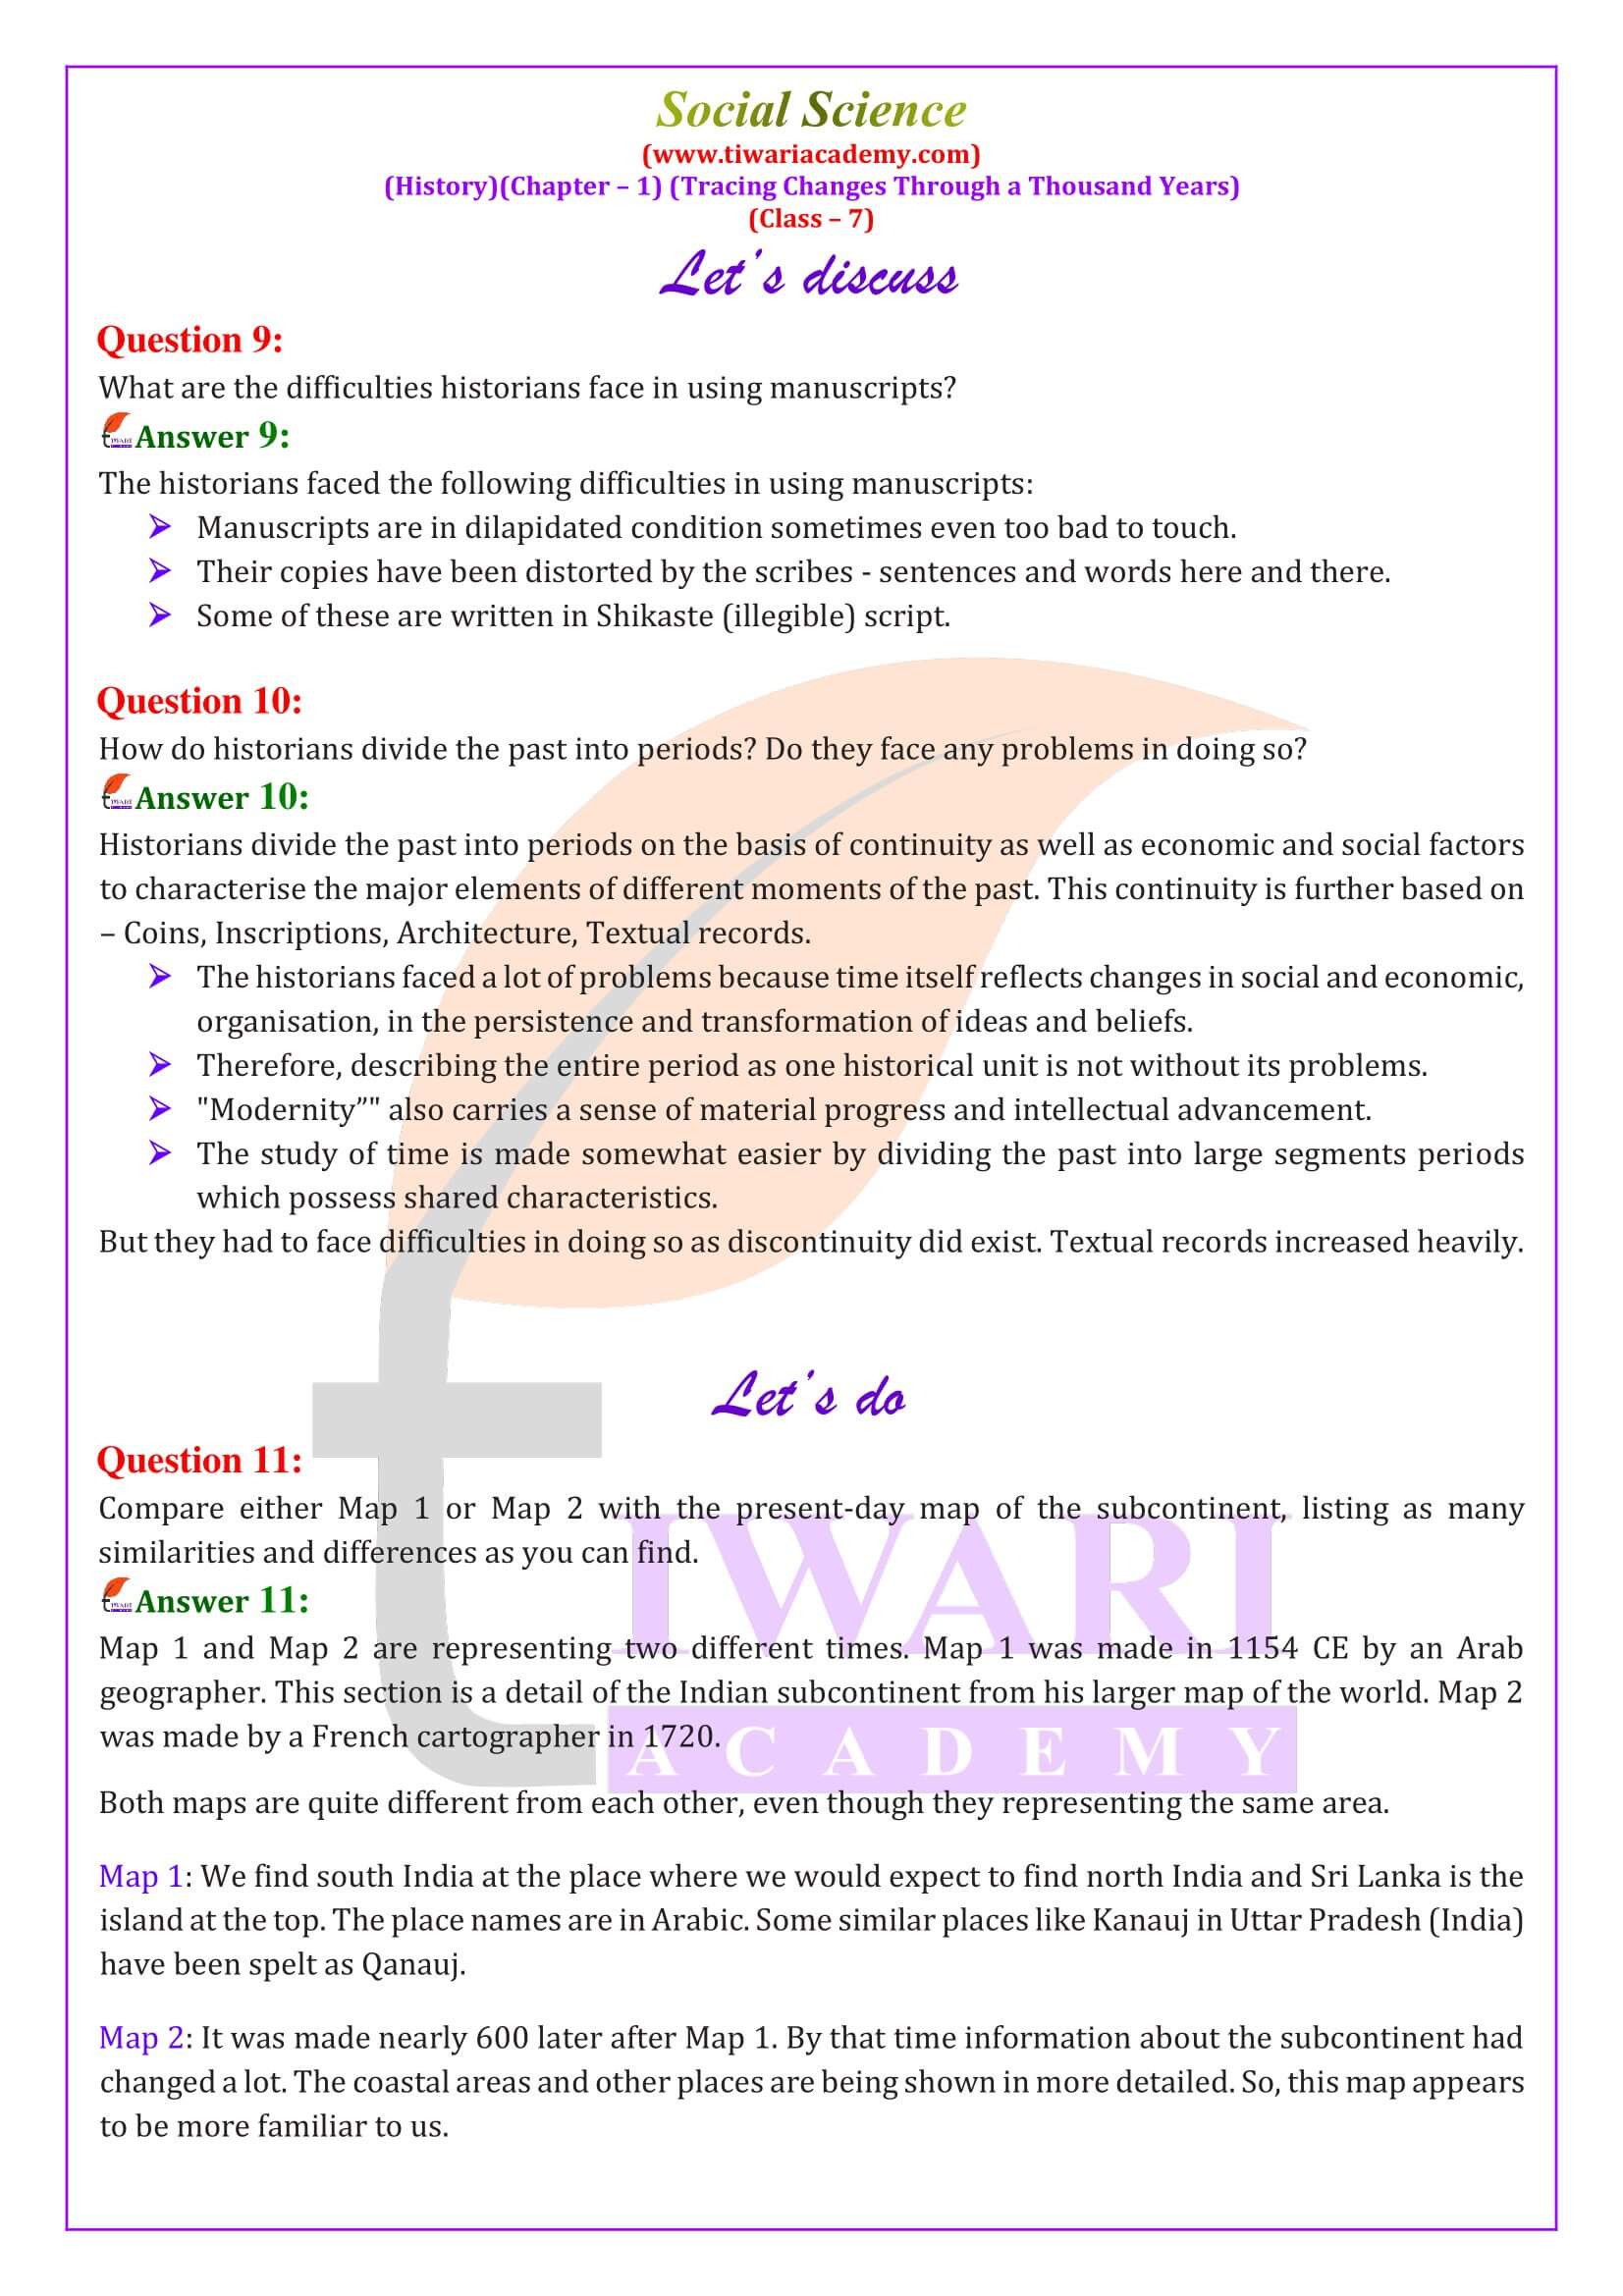 NCERT Solutions for Class 7 Social Science Chapter 1